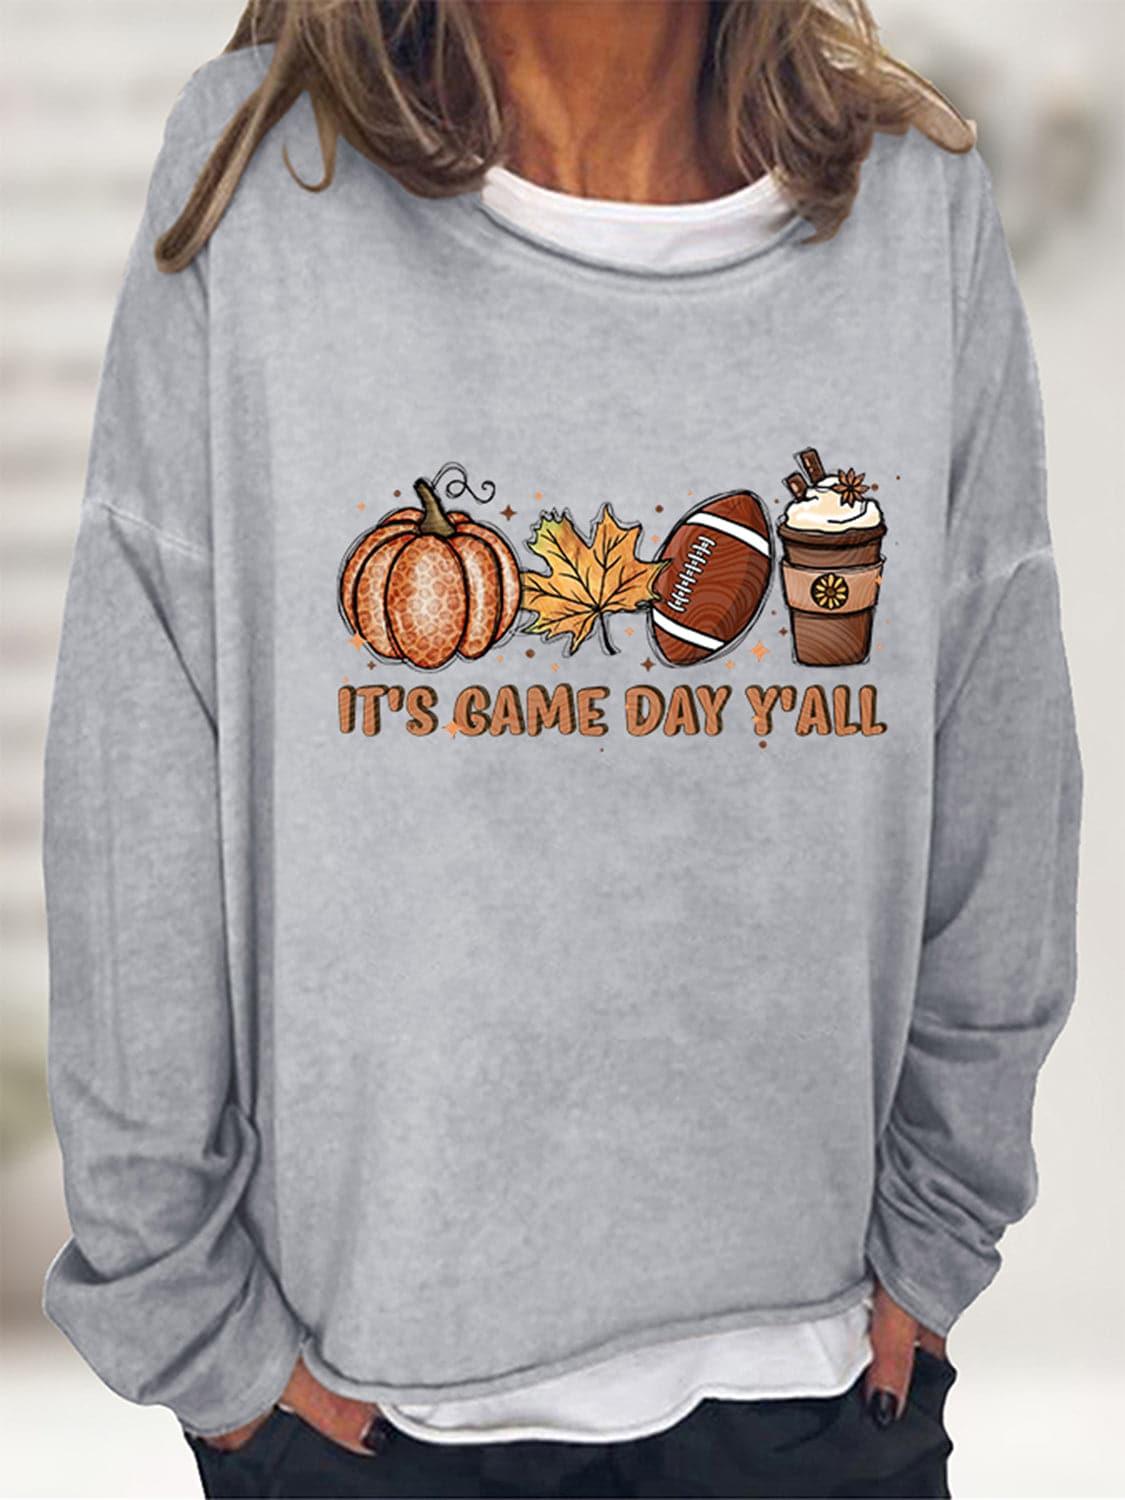 IT'S GAME DAY Y'ALL Graphic Sweatshirt, 5 Colors - SwagglyLife Home & Fashion